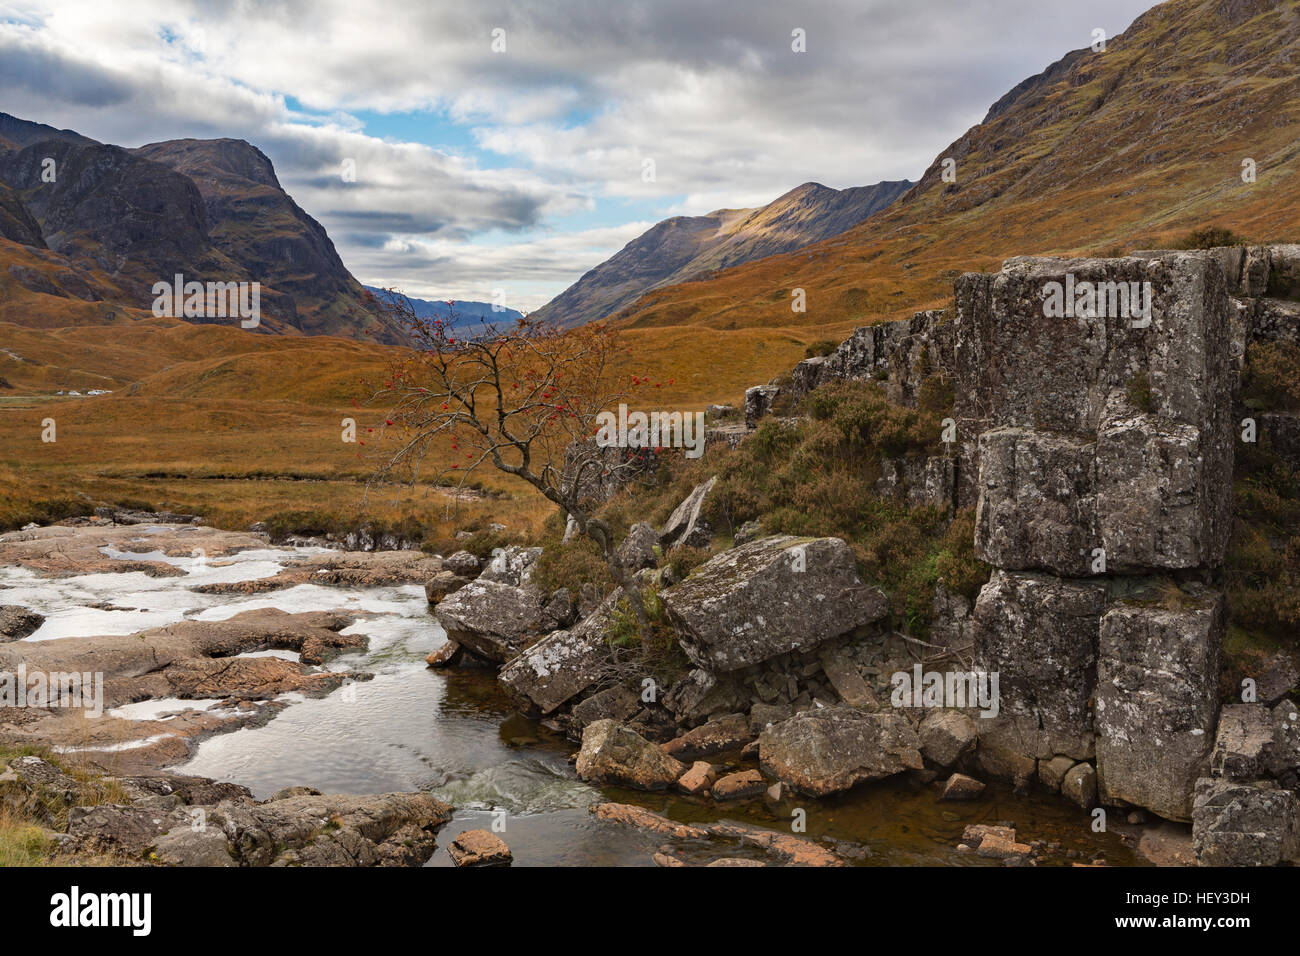 A Rowan grows from rocks above a river which flows towards the mountains in Glencoe, Scotland Stock Photo